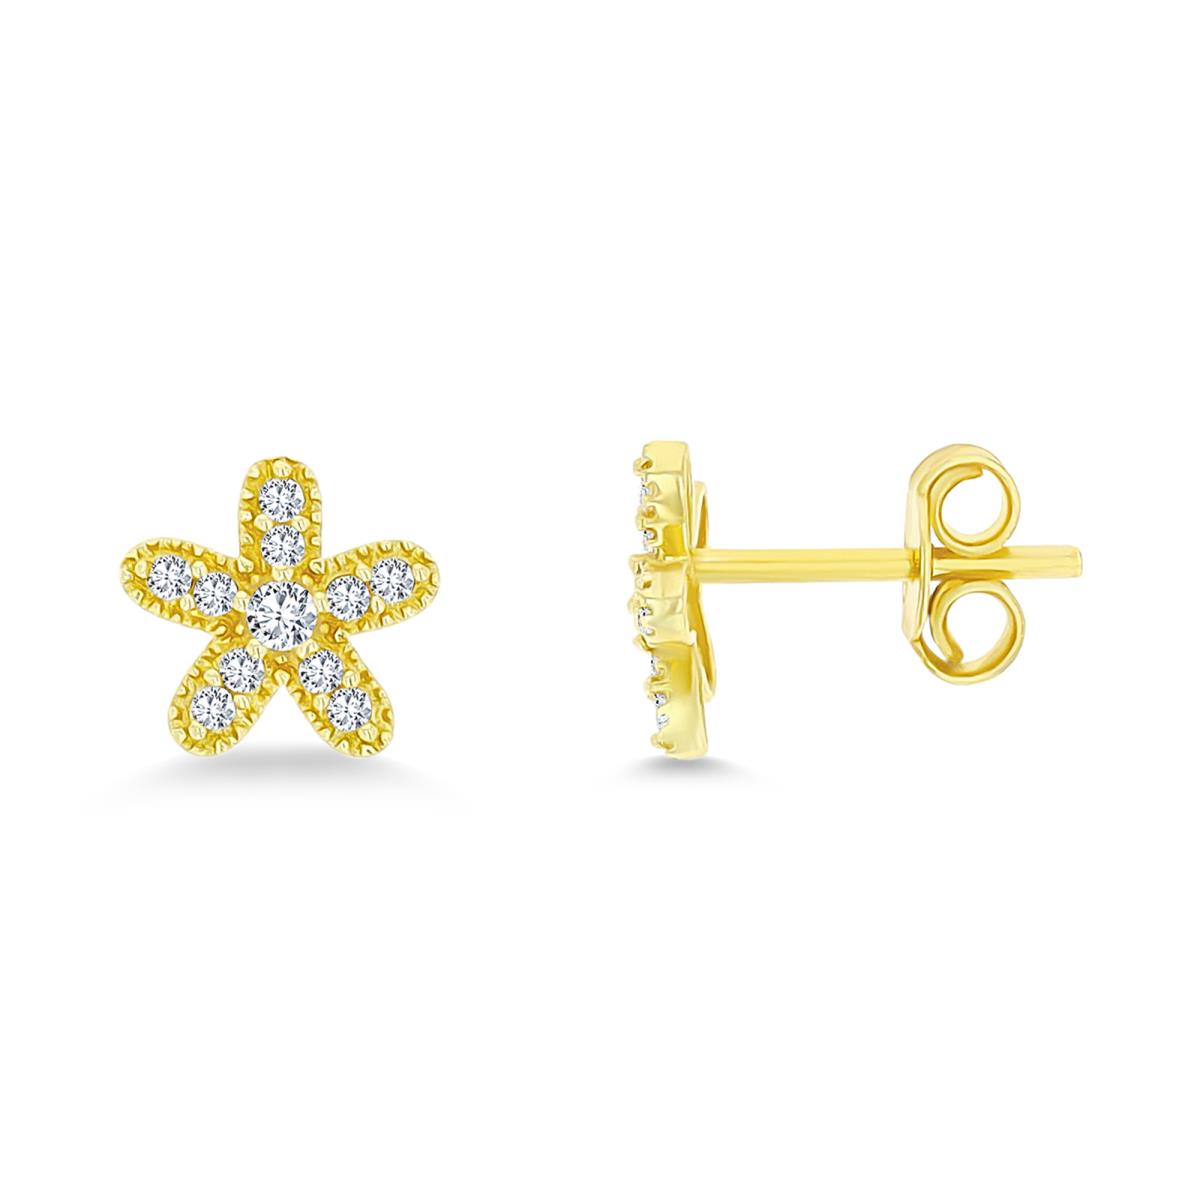 14K Yellow Gold Micropave CZ Daisy Stud Earring with Clutch Back